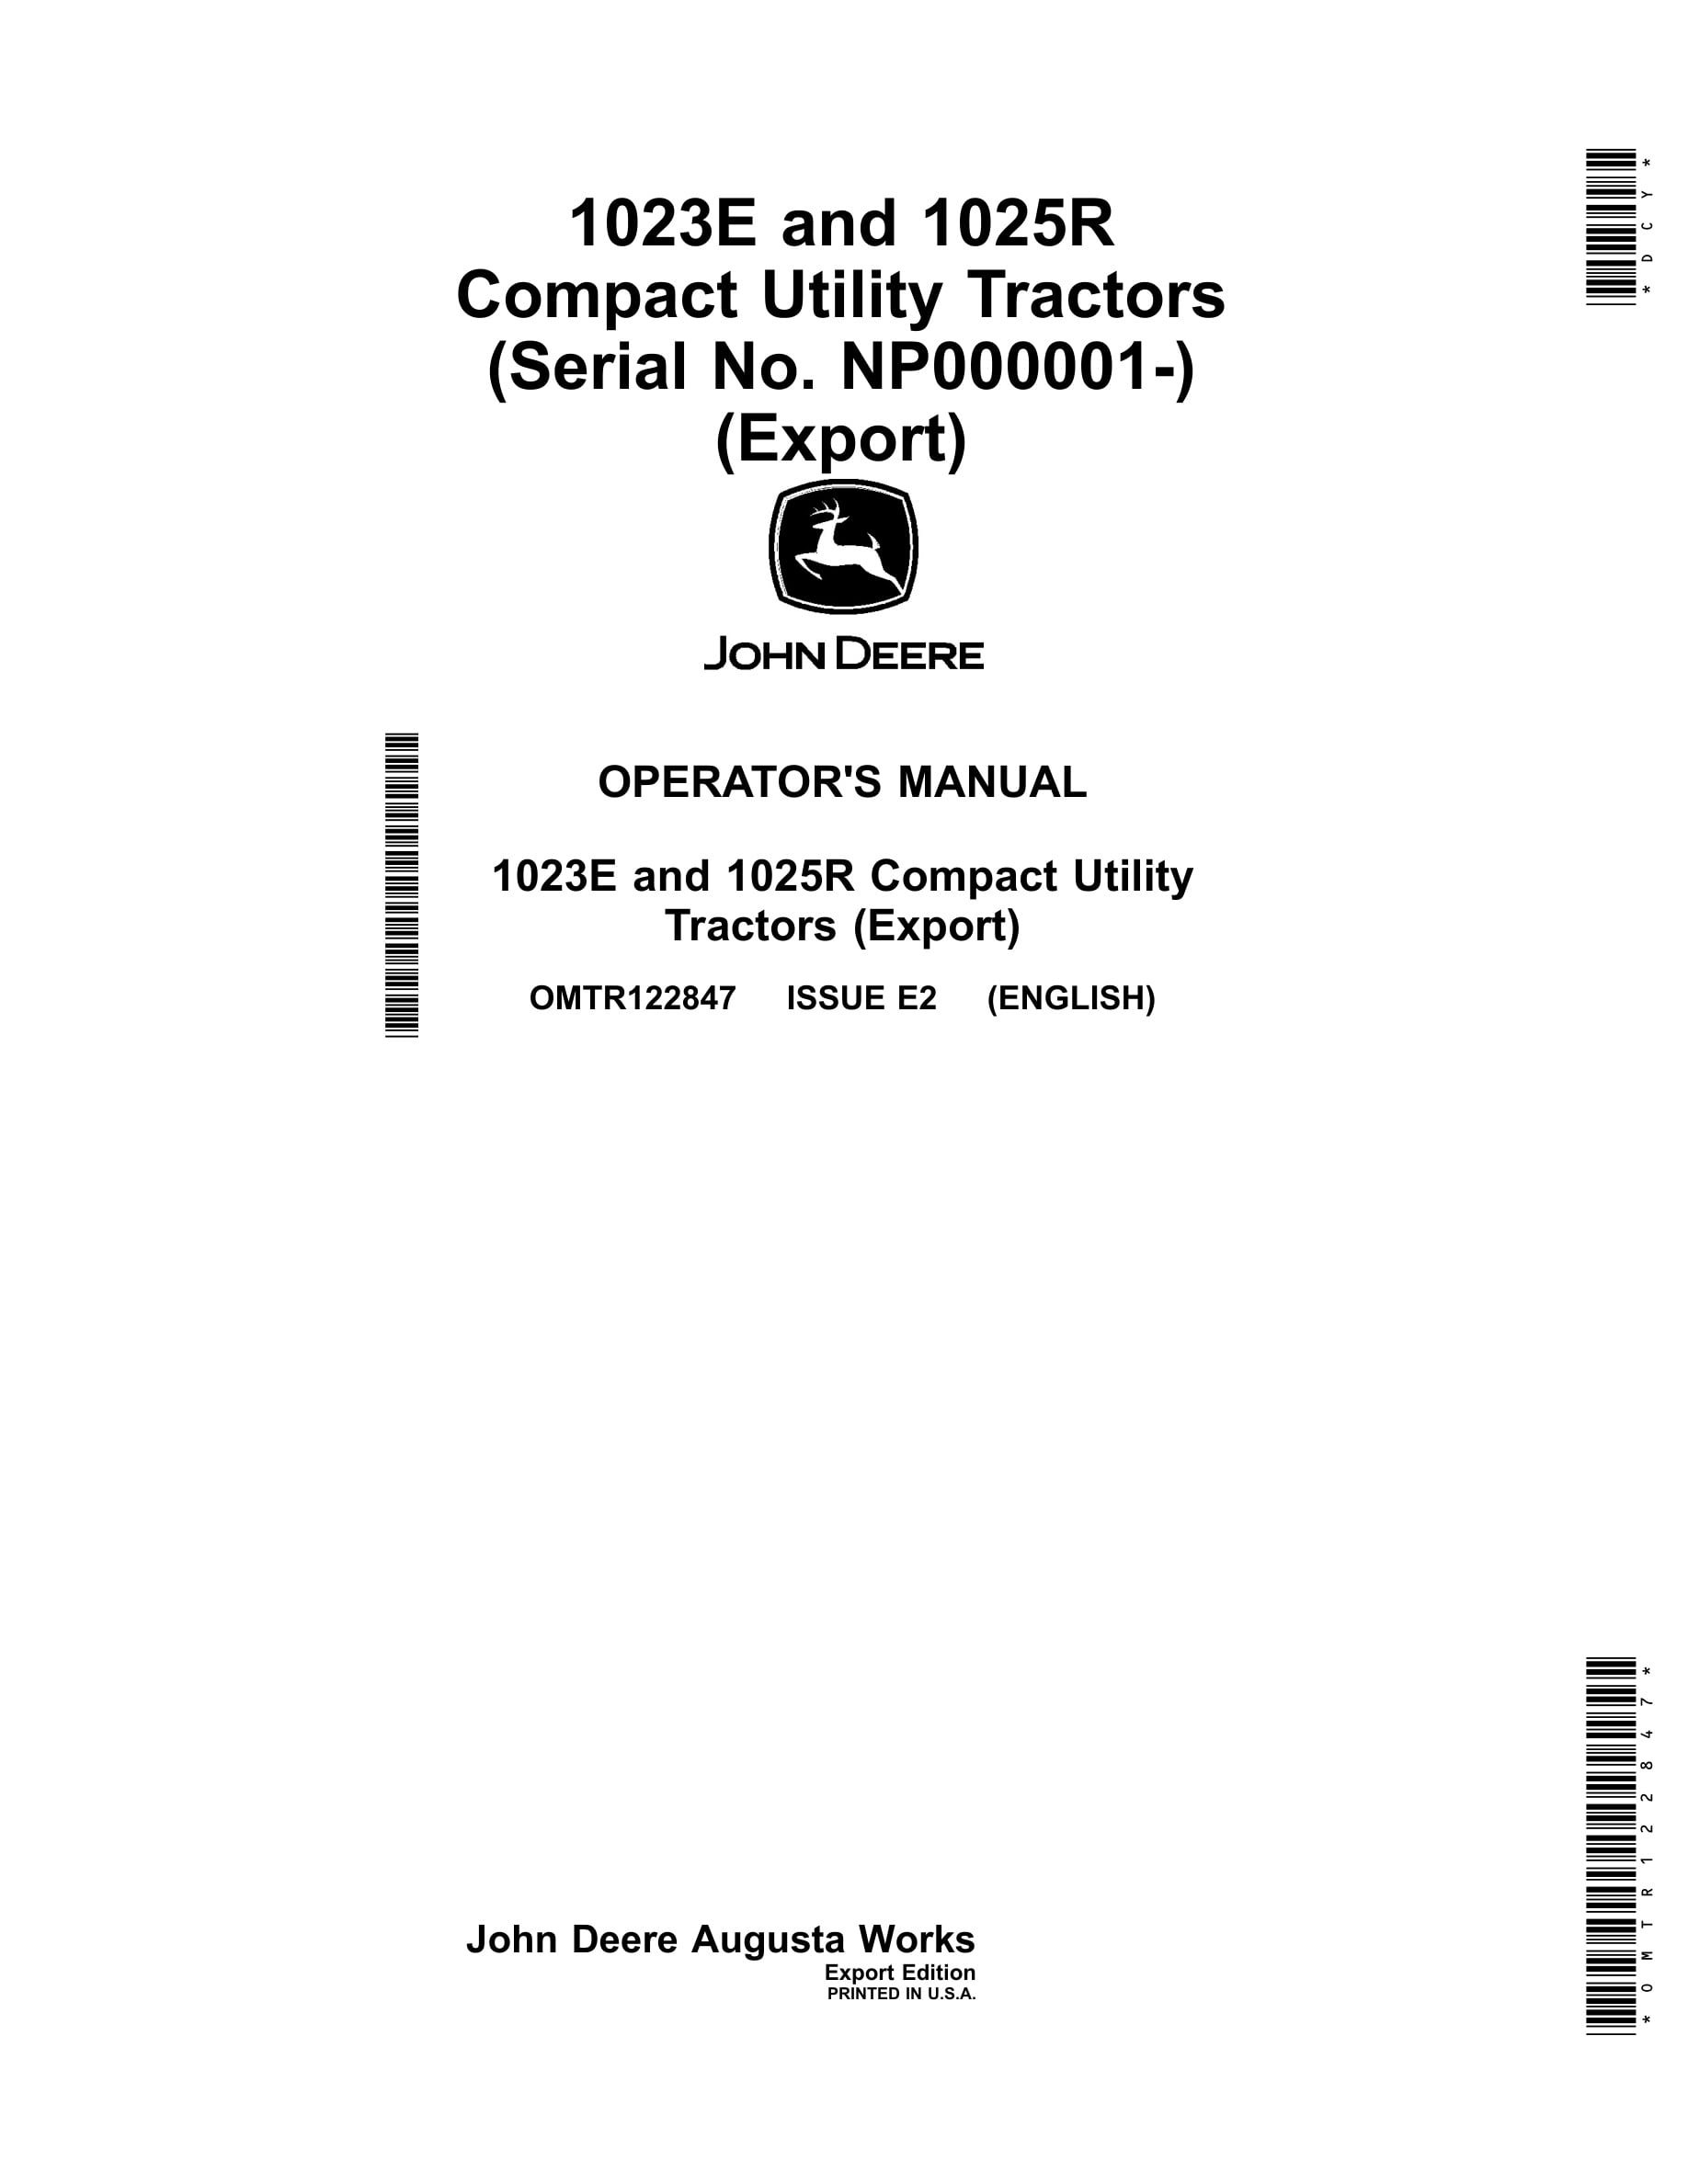 John Deere 1023e And 1025r Compact Utility Tractors Operator Manuals OMTR122847-1